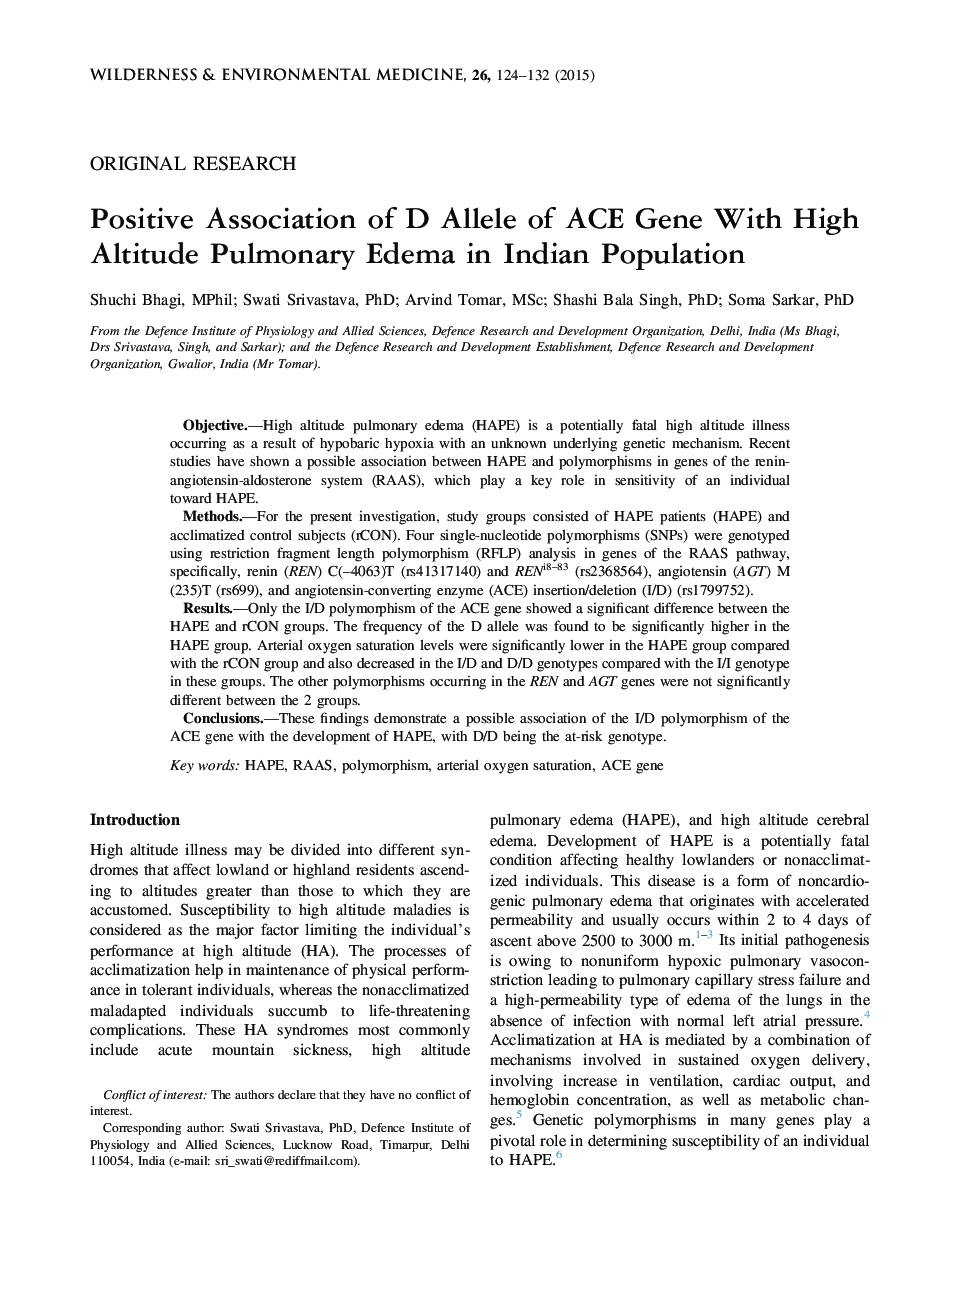 Positive Association of D Allele of ACE Gene With High Altitude Pulmonary Edema in Indian Population 